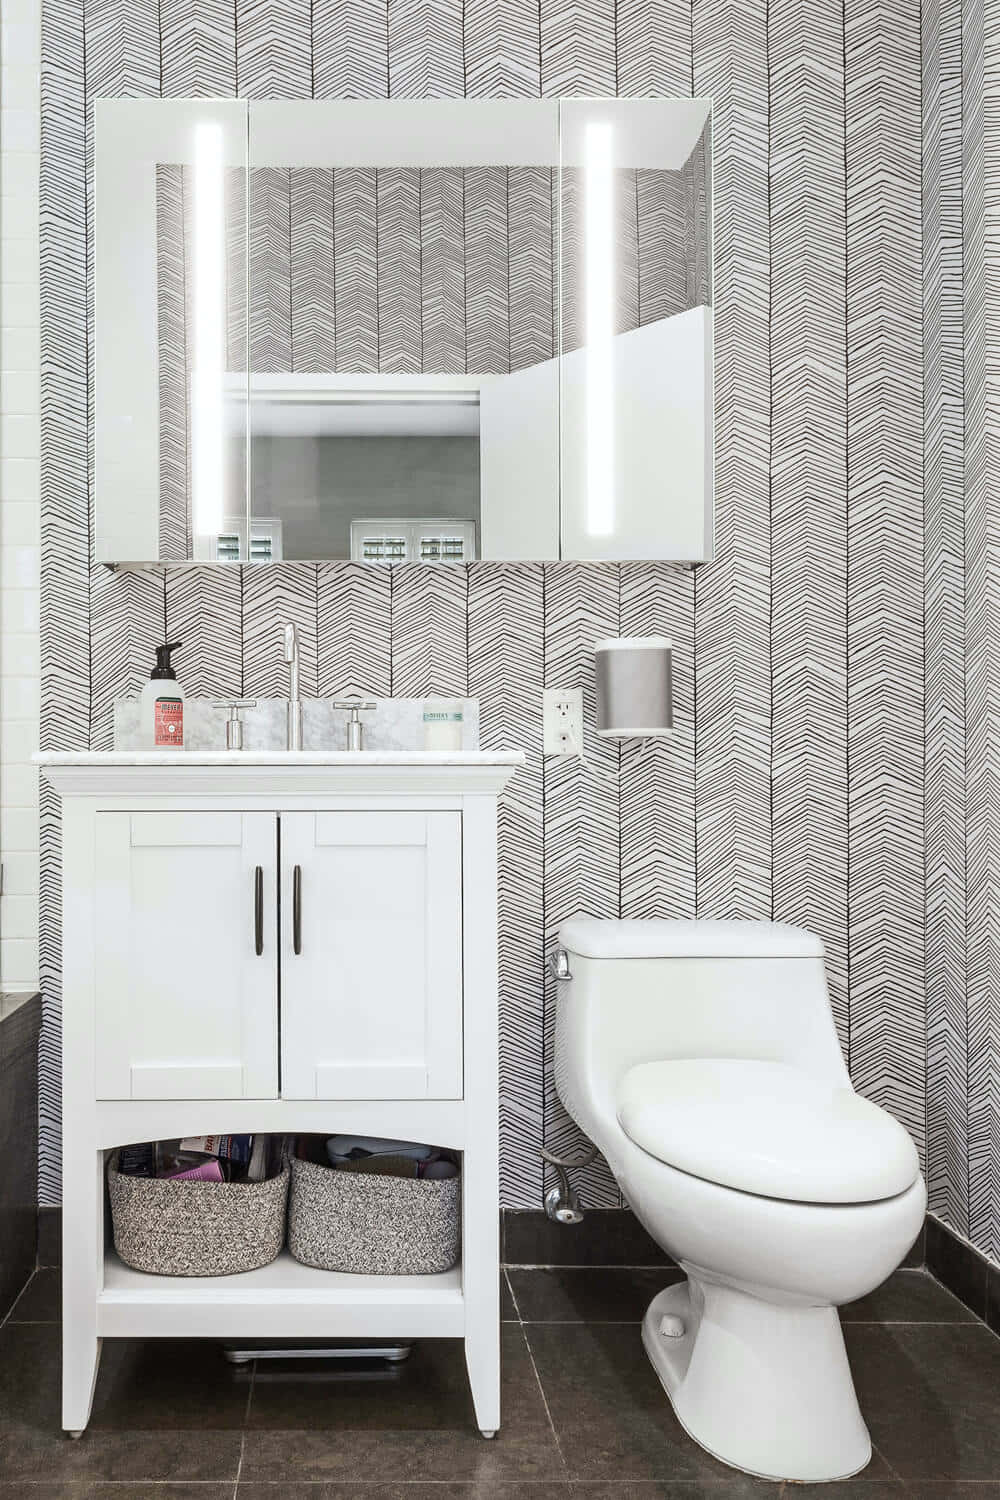 White Bathroom Arrow Patterned Walls Background